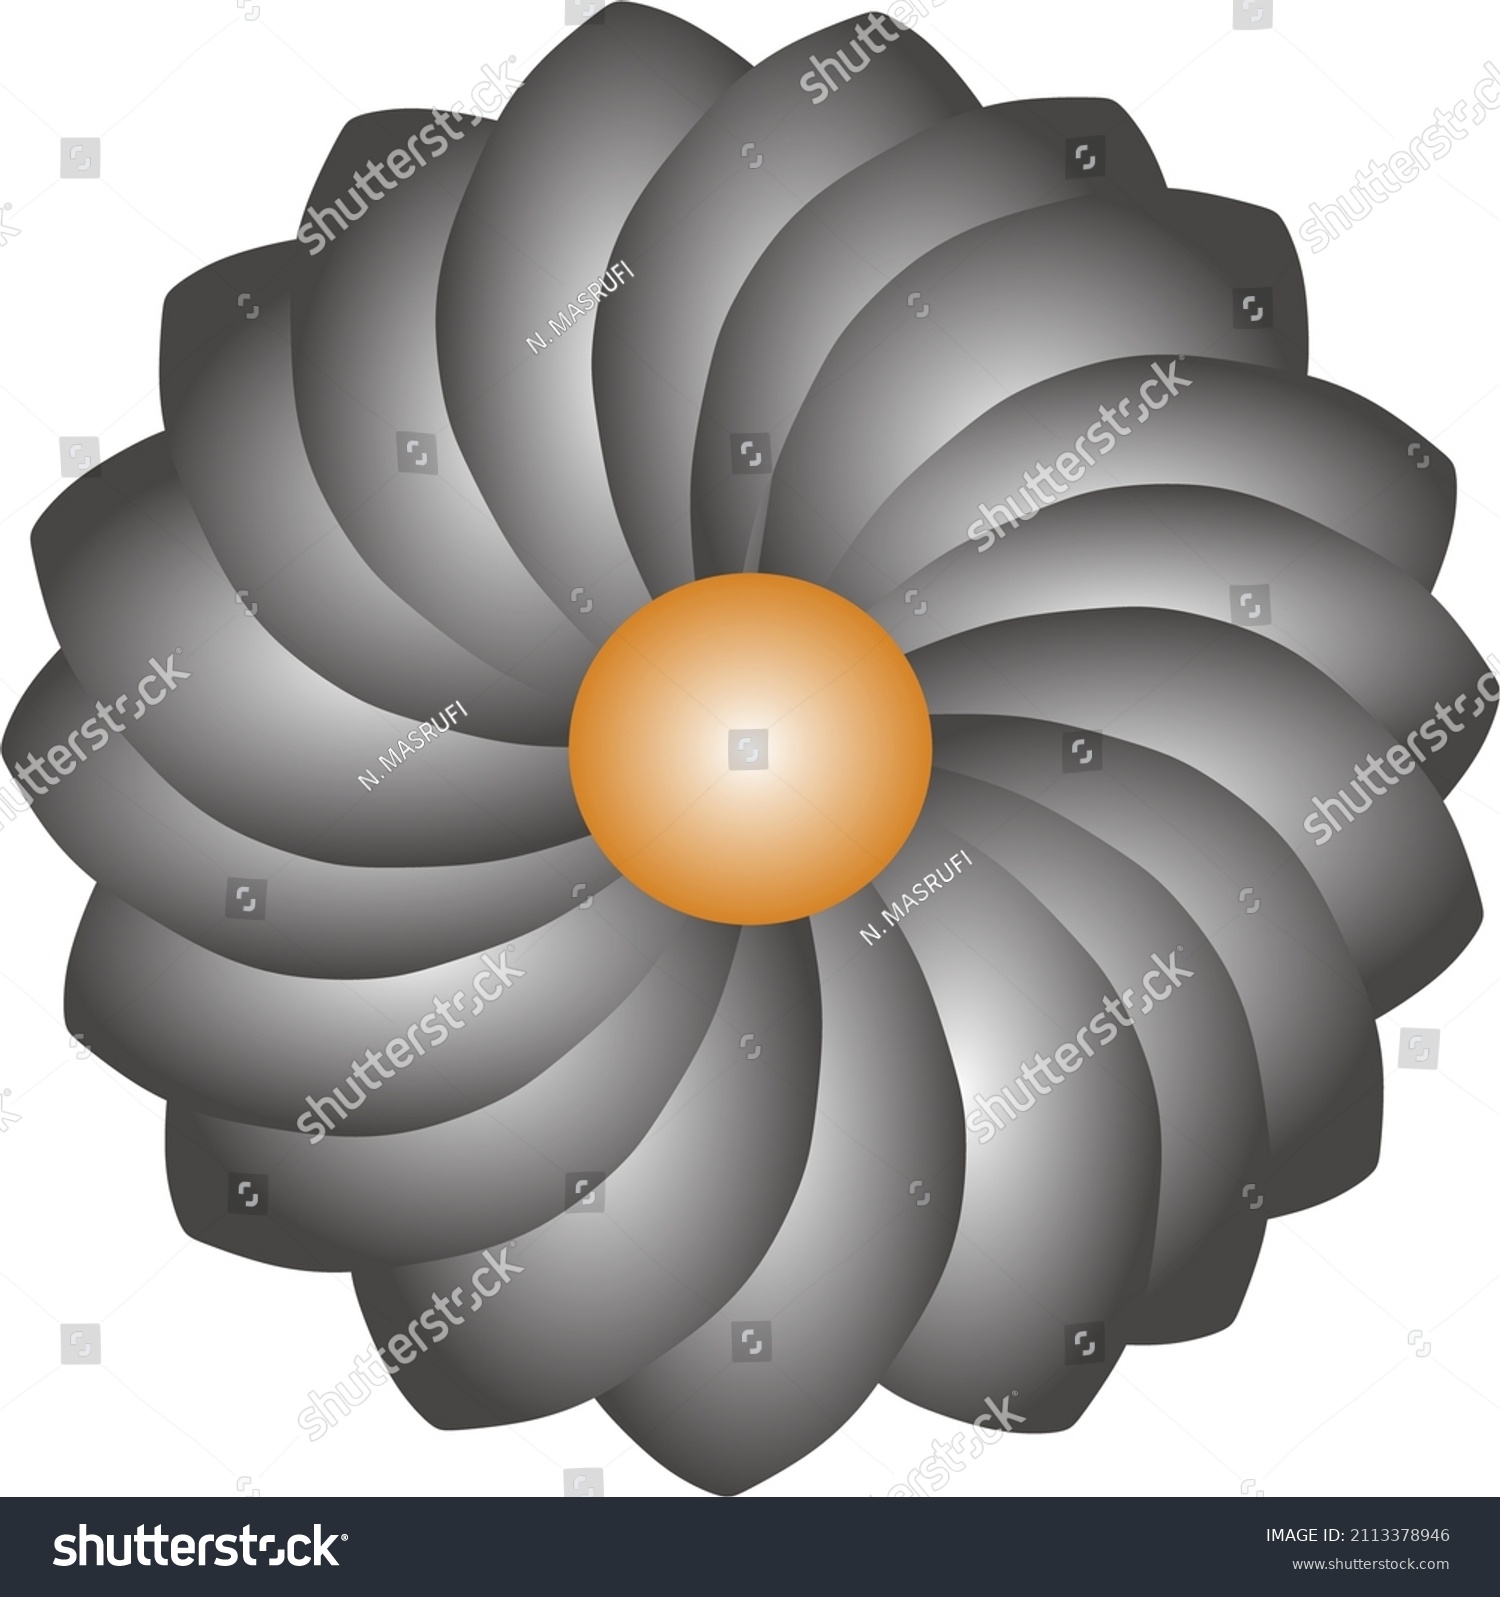 SVG of sunflower with dark color without stem svg